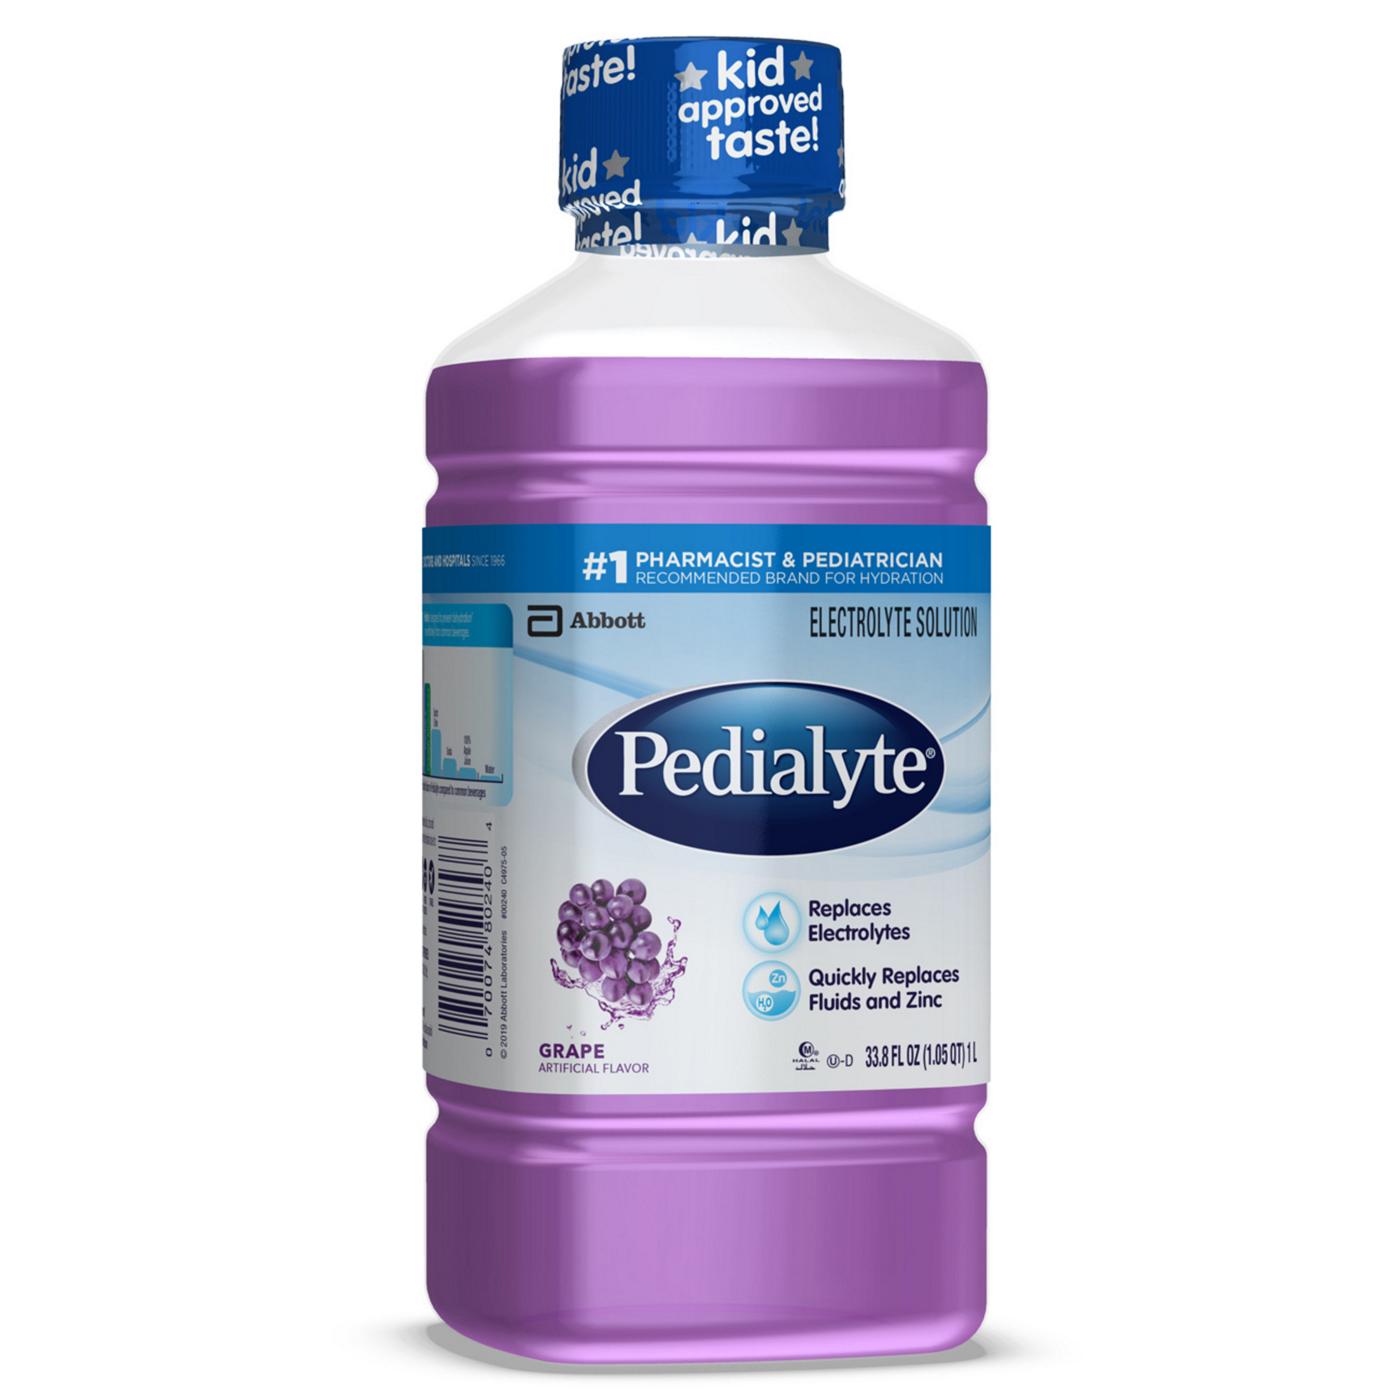 Pedialyte Electrolyte Solution - Grape; image 3 of 9